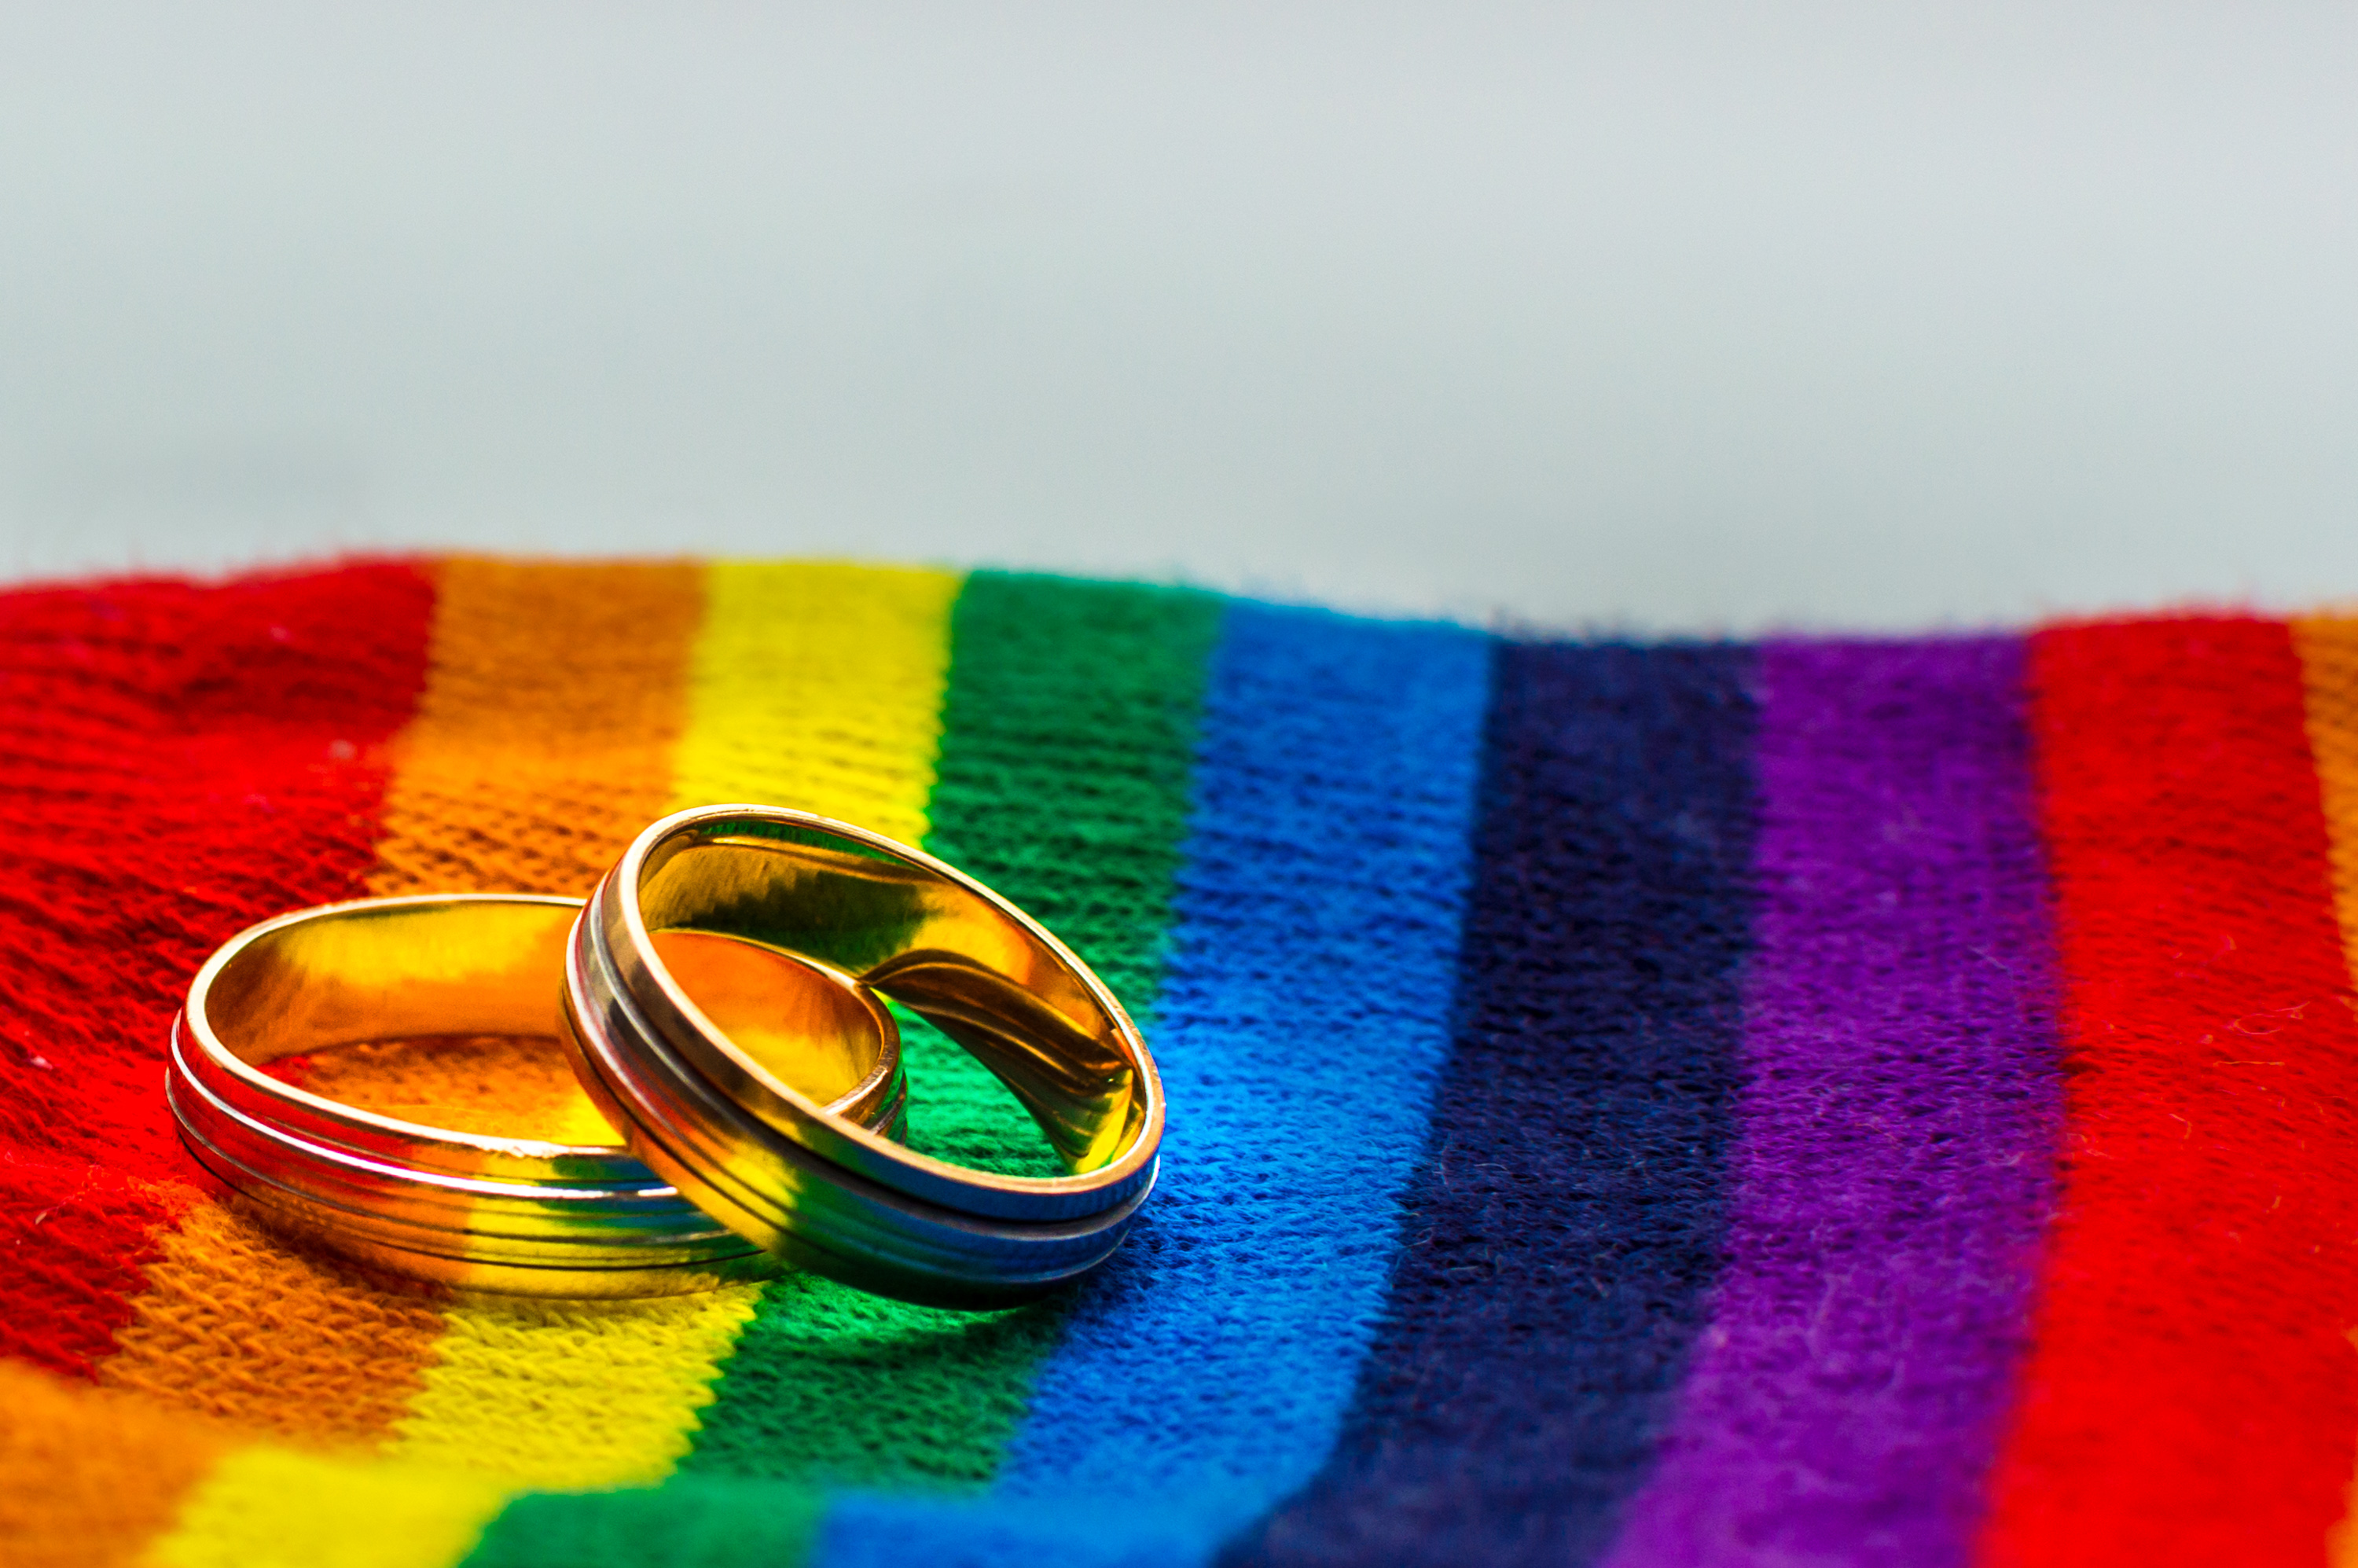 Is a marriage in the cayman islands legal in the united states?